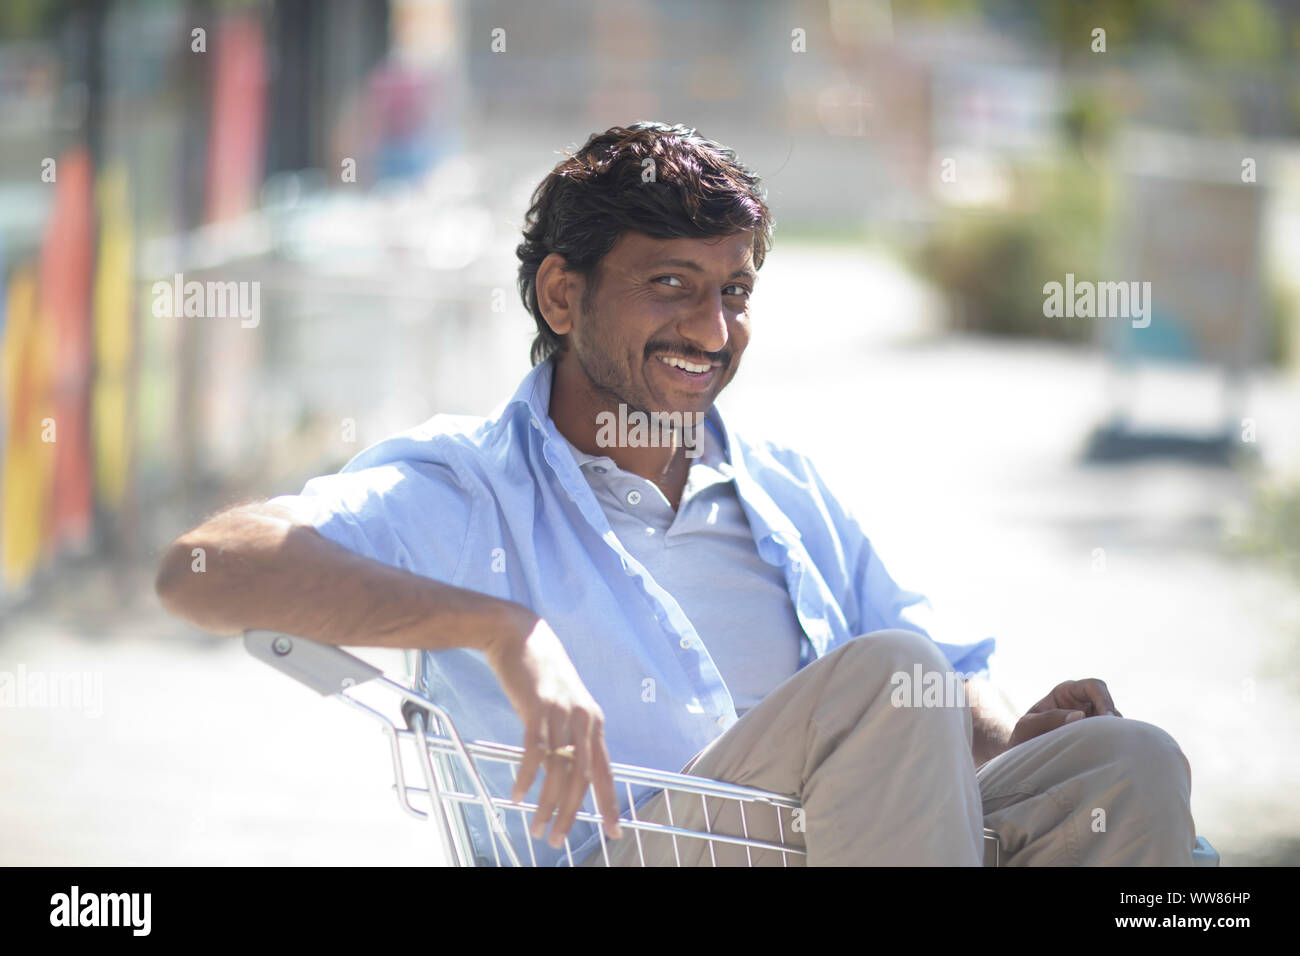 Young man sitting in shopping venture Banque D'Images